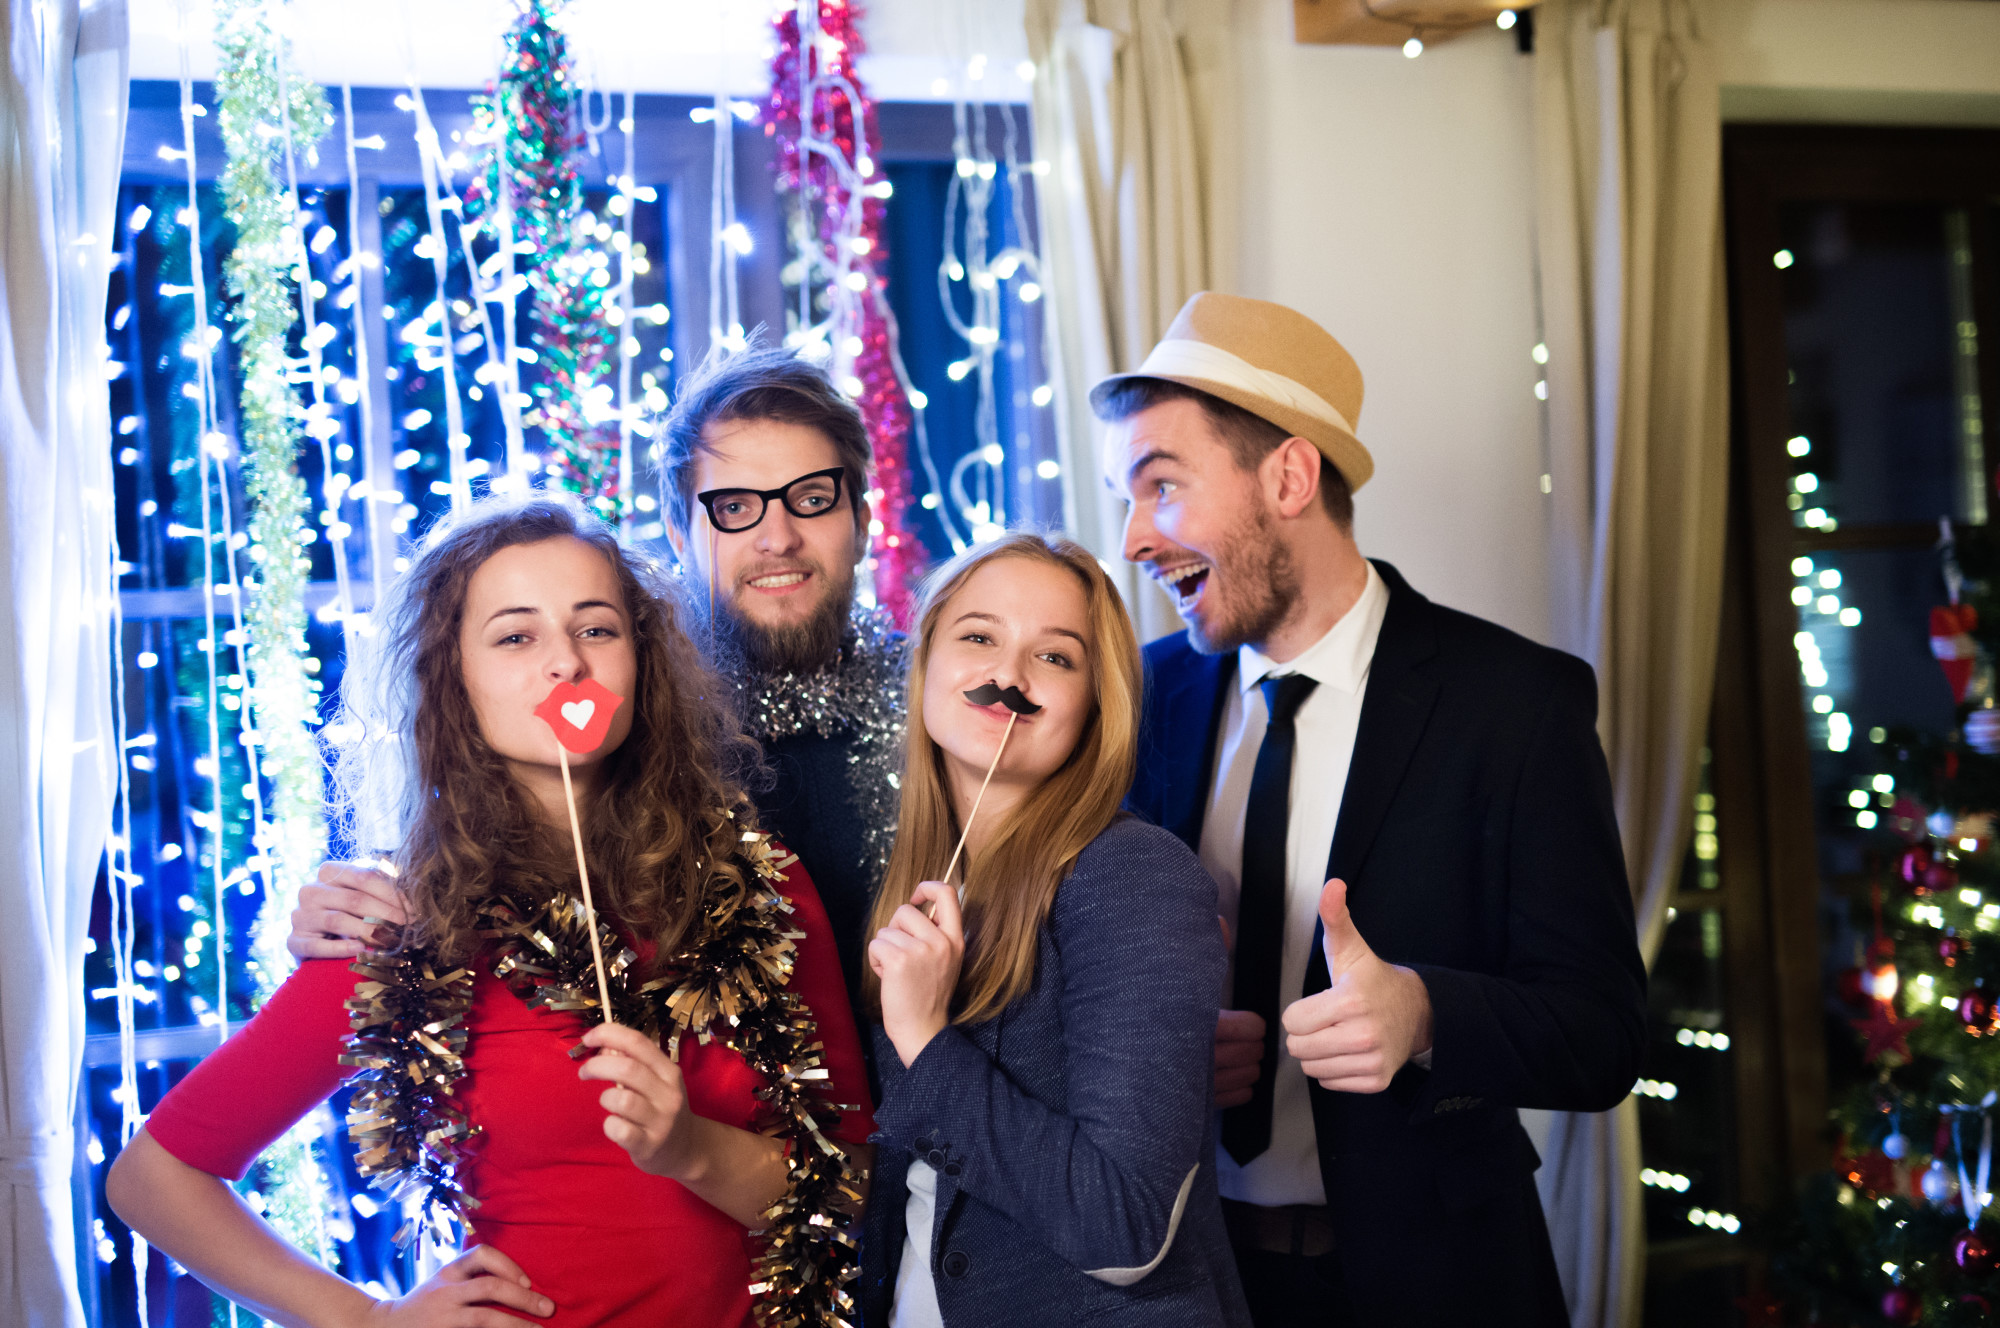 How to Take Wickedly Awesome Party Photos